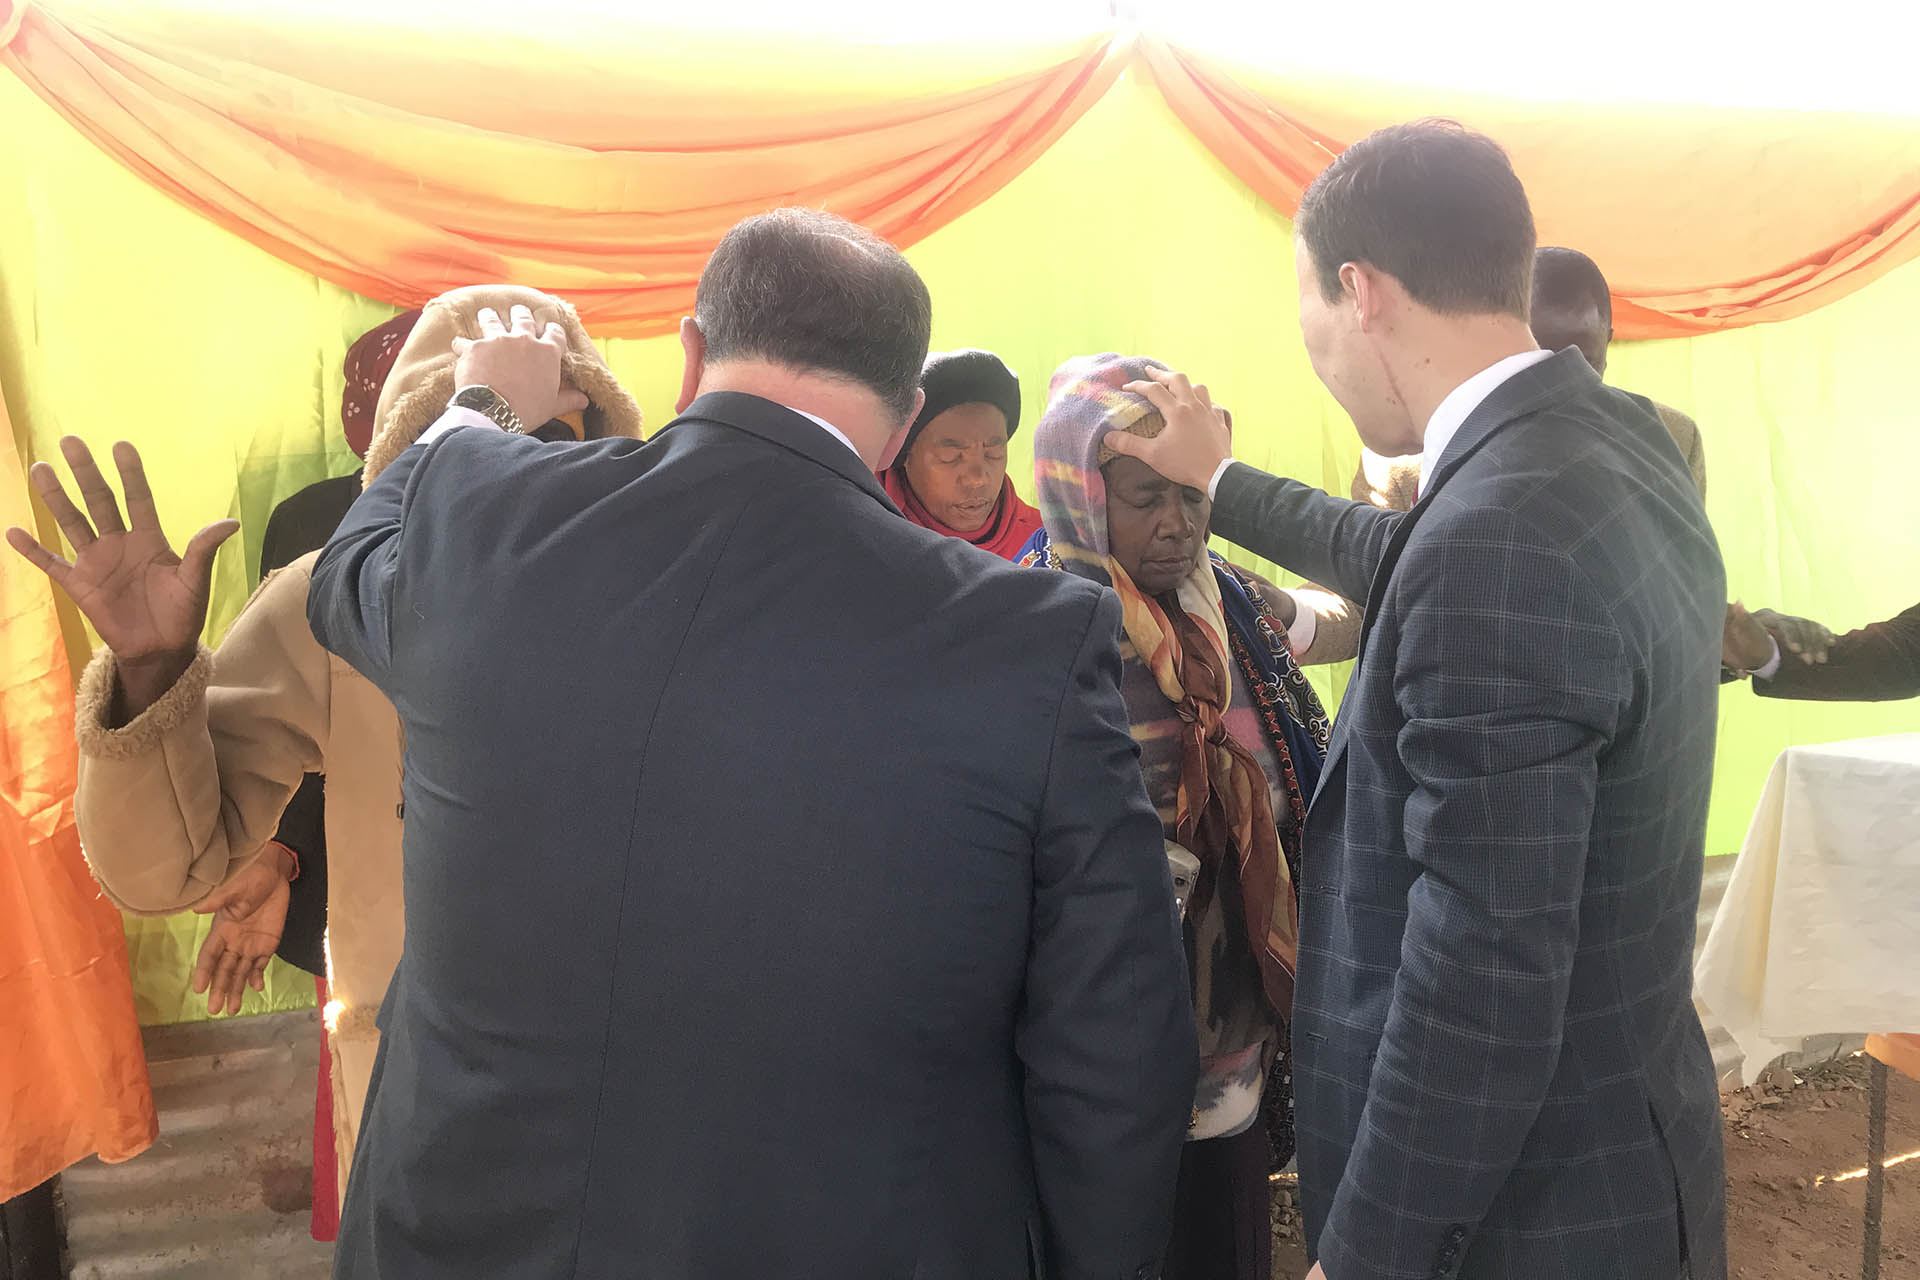 Bishop Gregory Riggen and Rev. Jared Hilton praying for a group of people following a Sunday morning service in Morningside, Bulawayao, Zimbabwe c. 2017